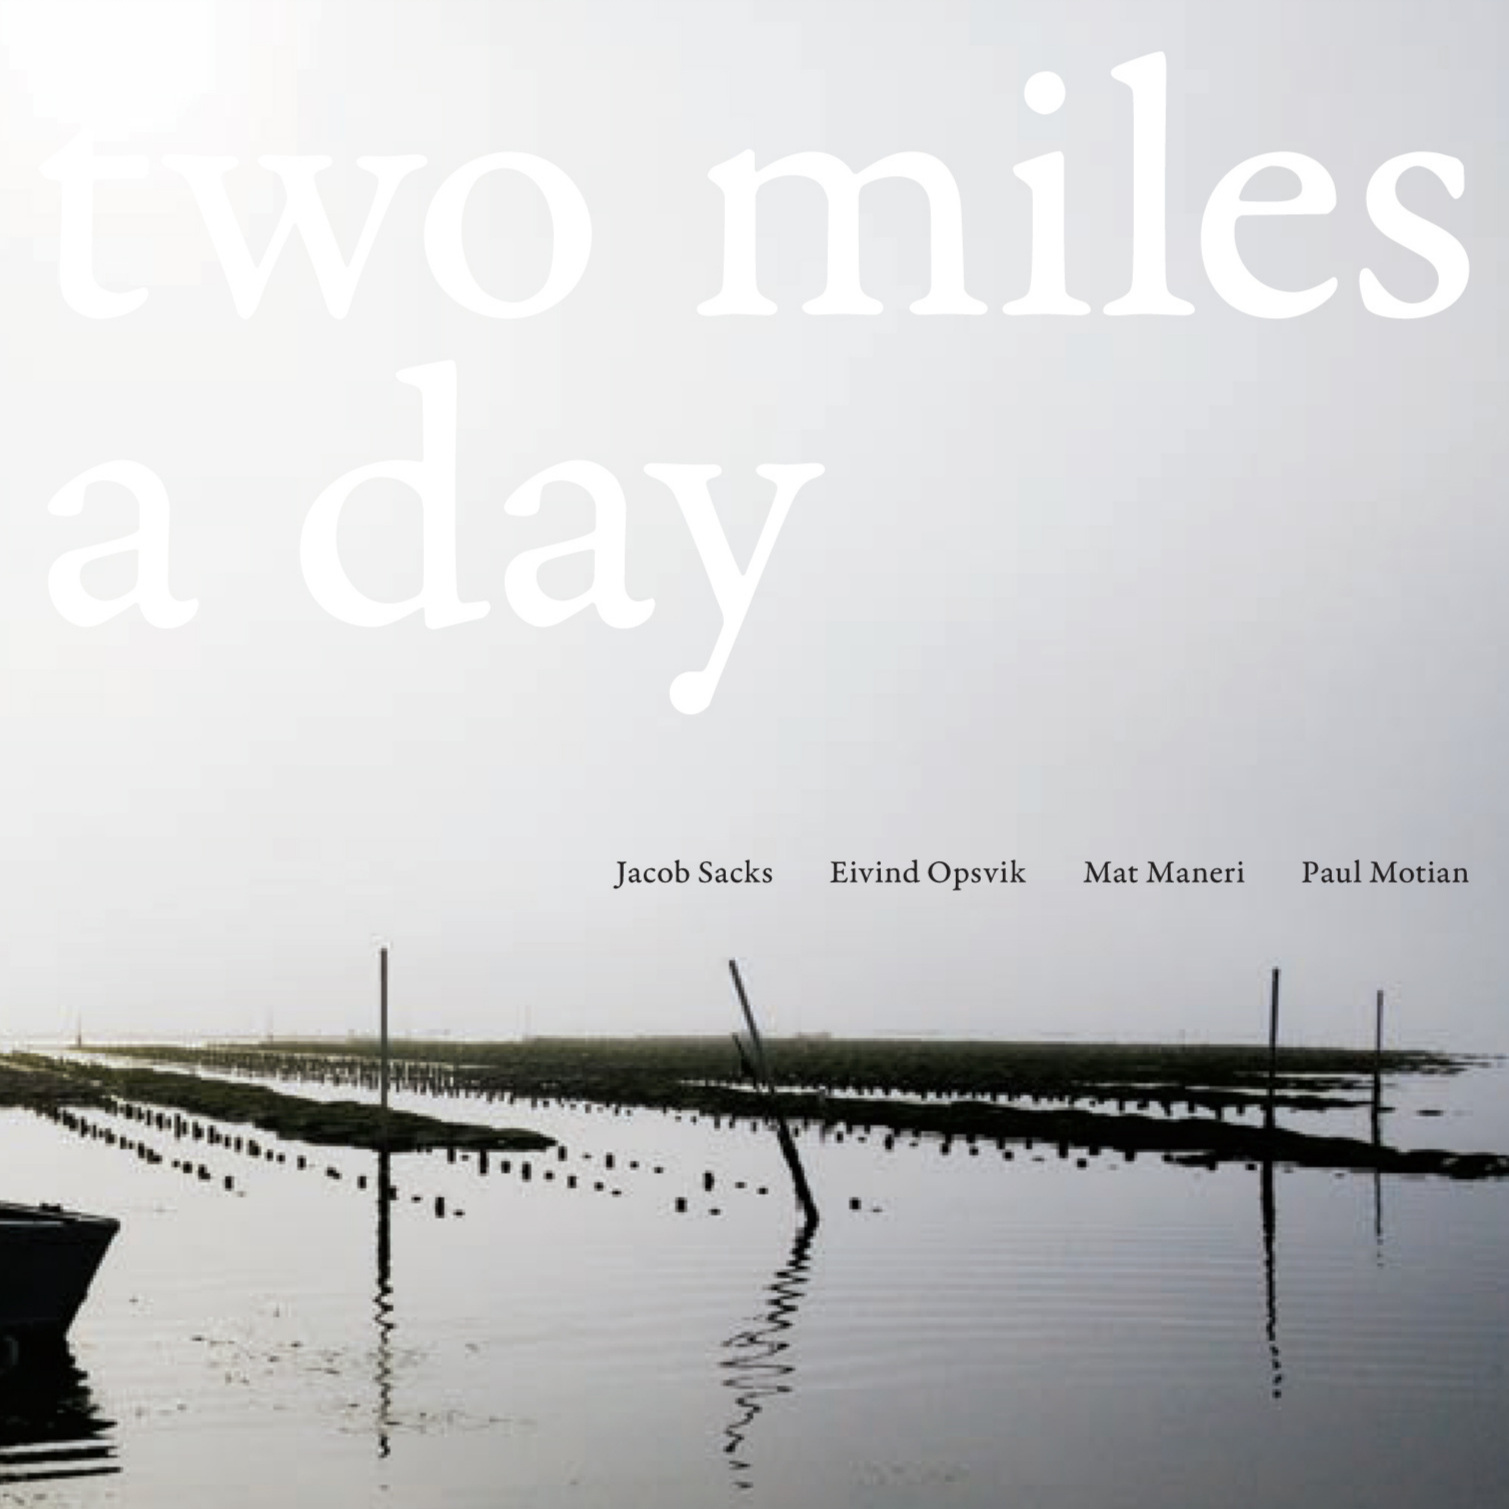 Two miles